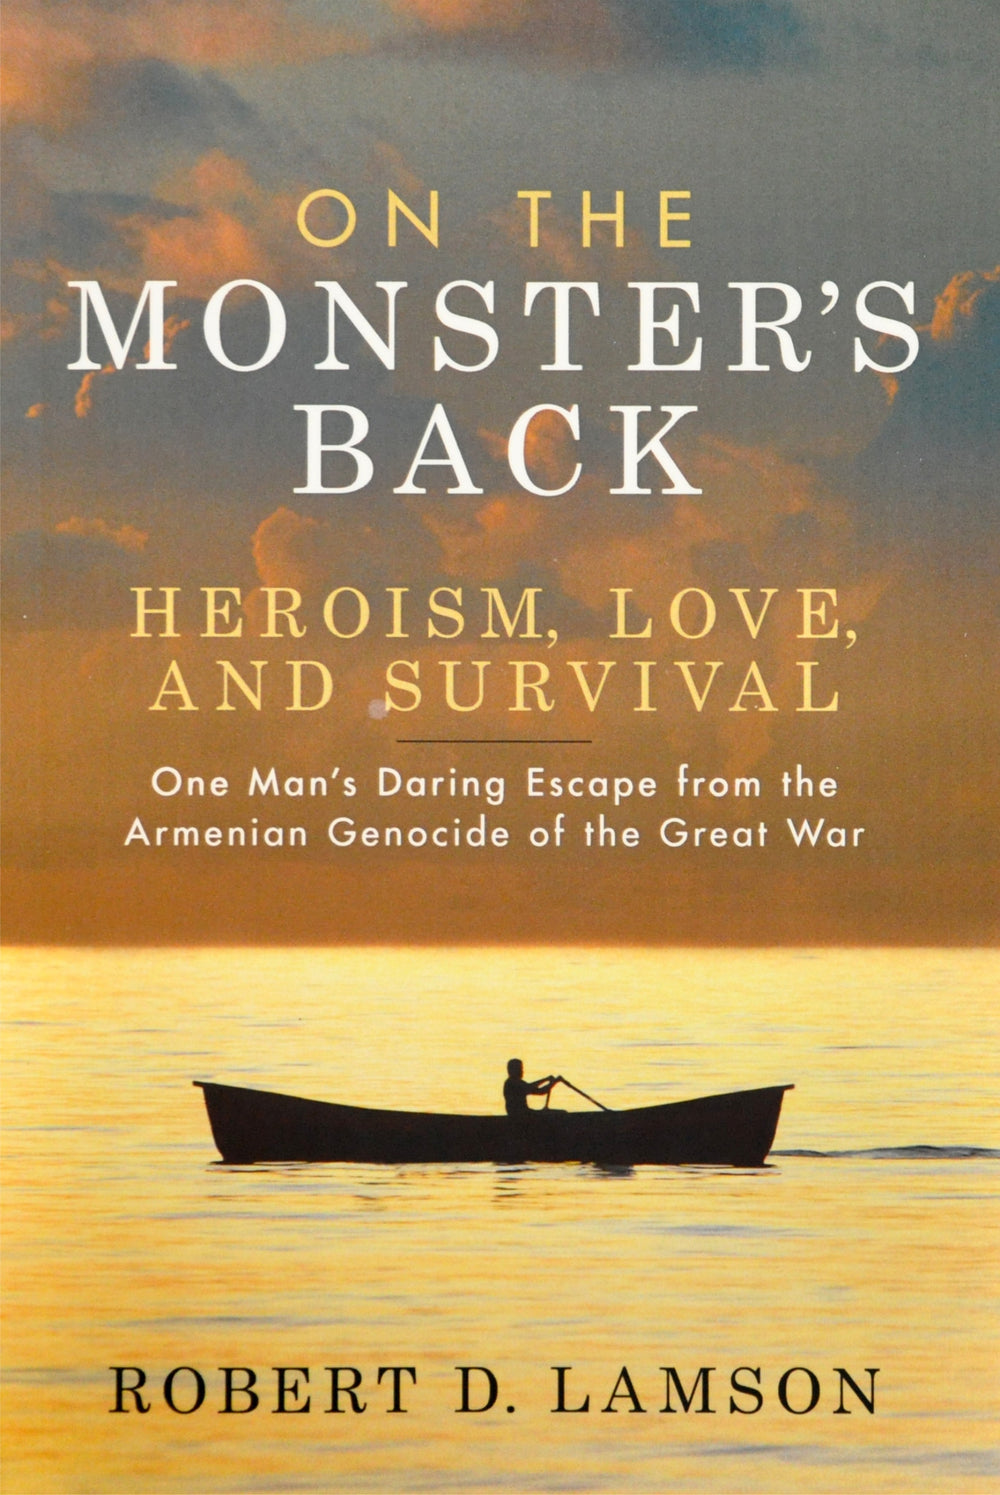 On The Monster's Back: Heroism, Love, and Survival